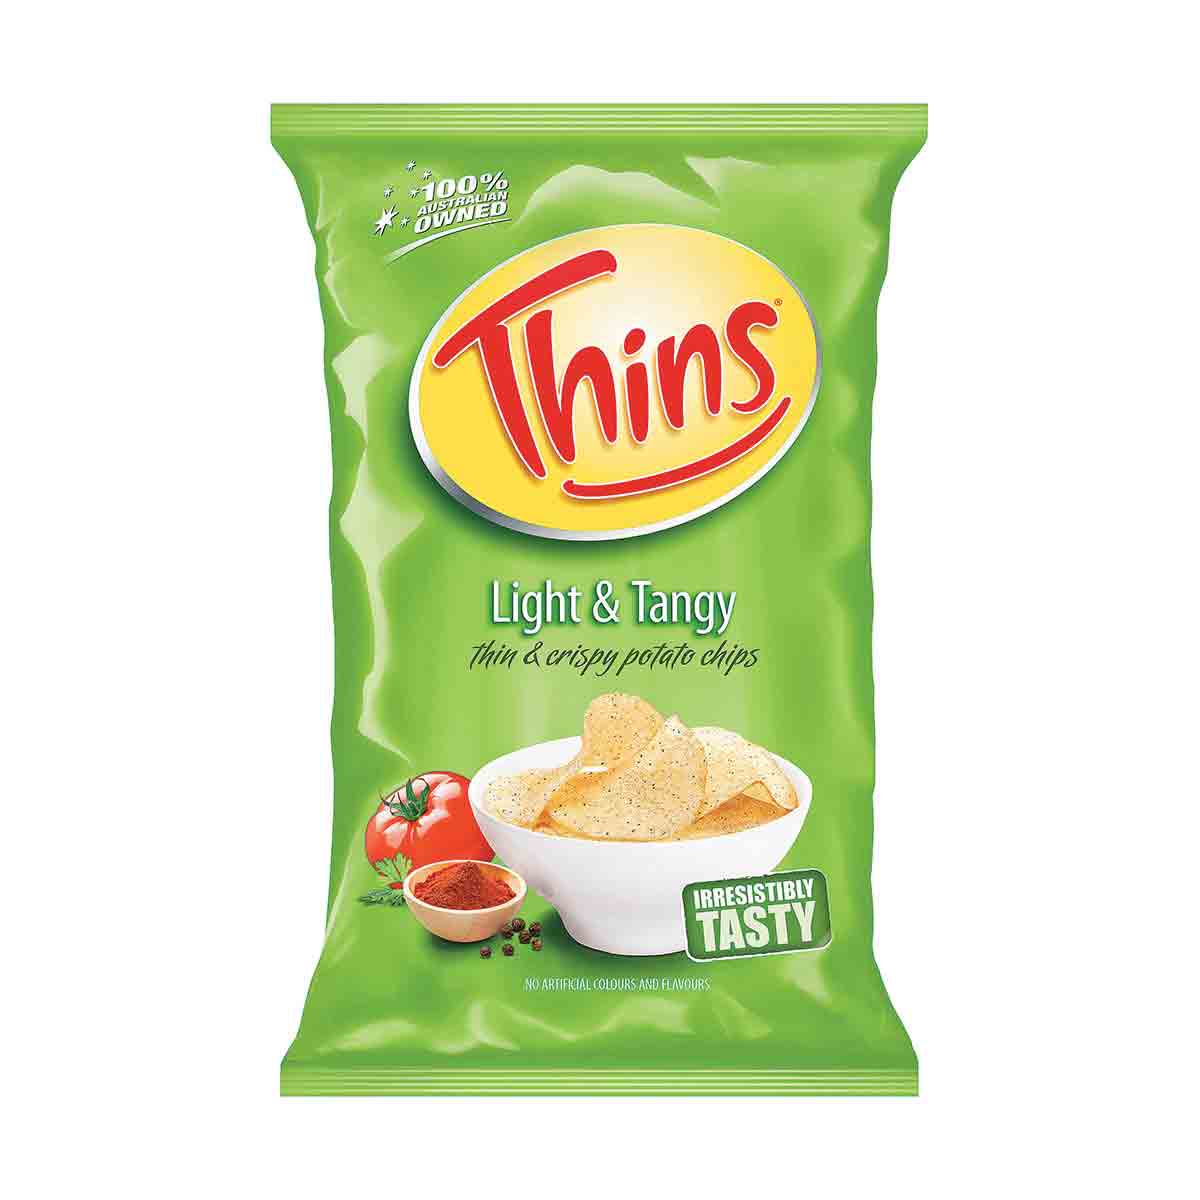 Thins Light and Tangy